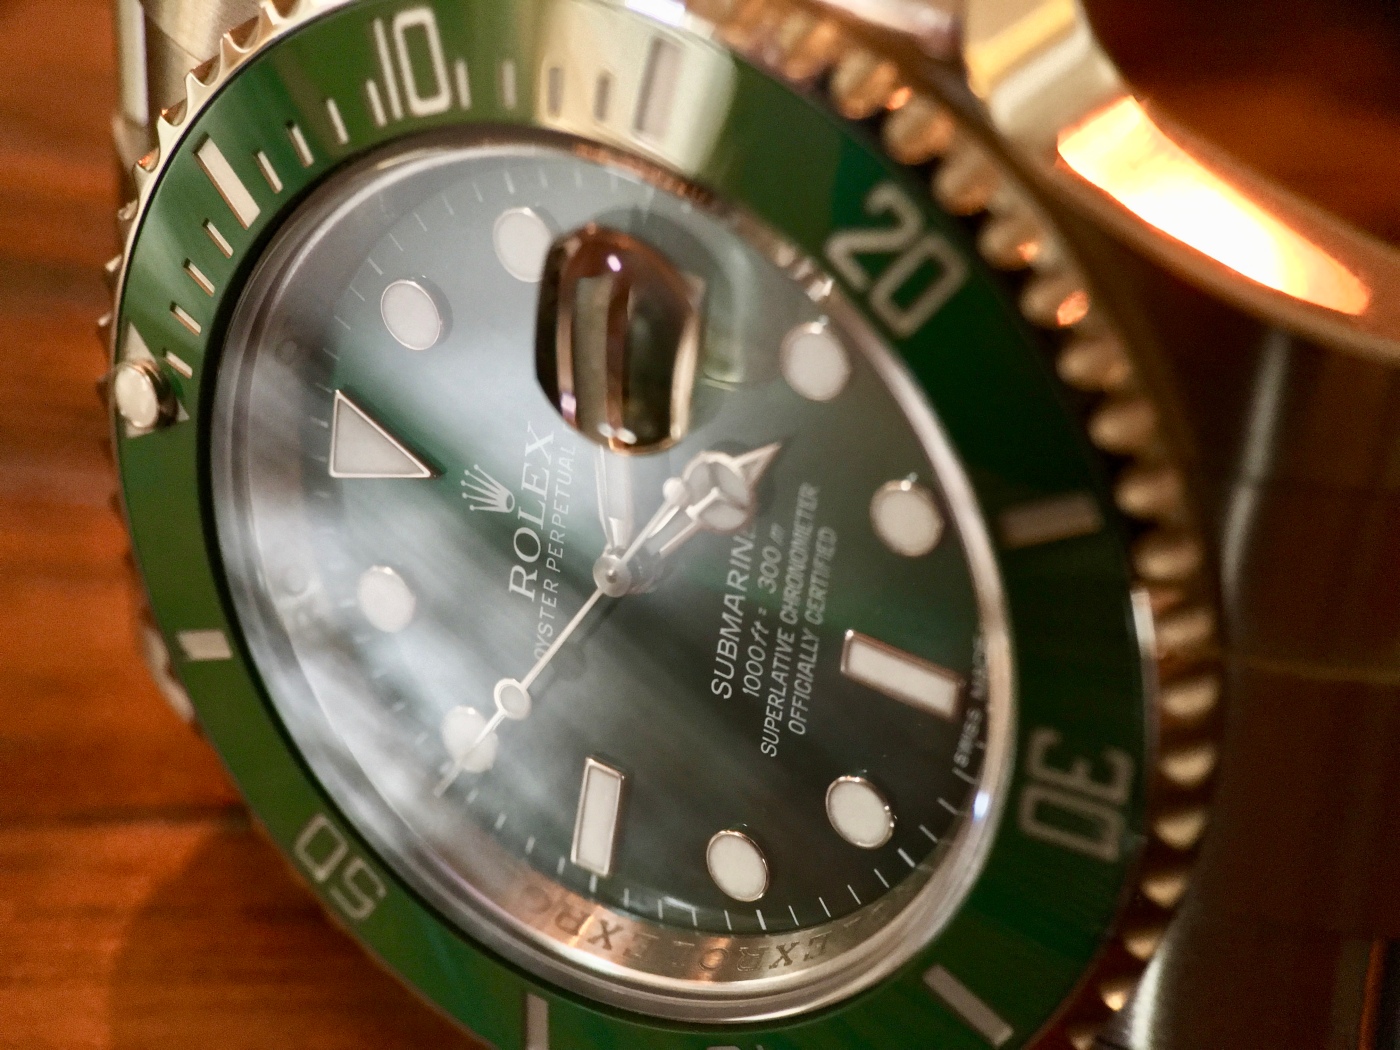 Review: Meet the Hulk – The Green-on-Green Rolex Submariner